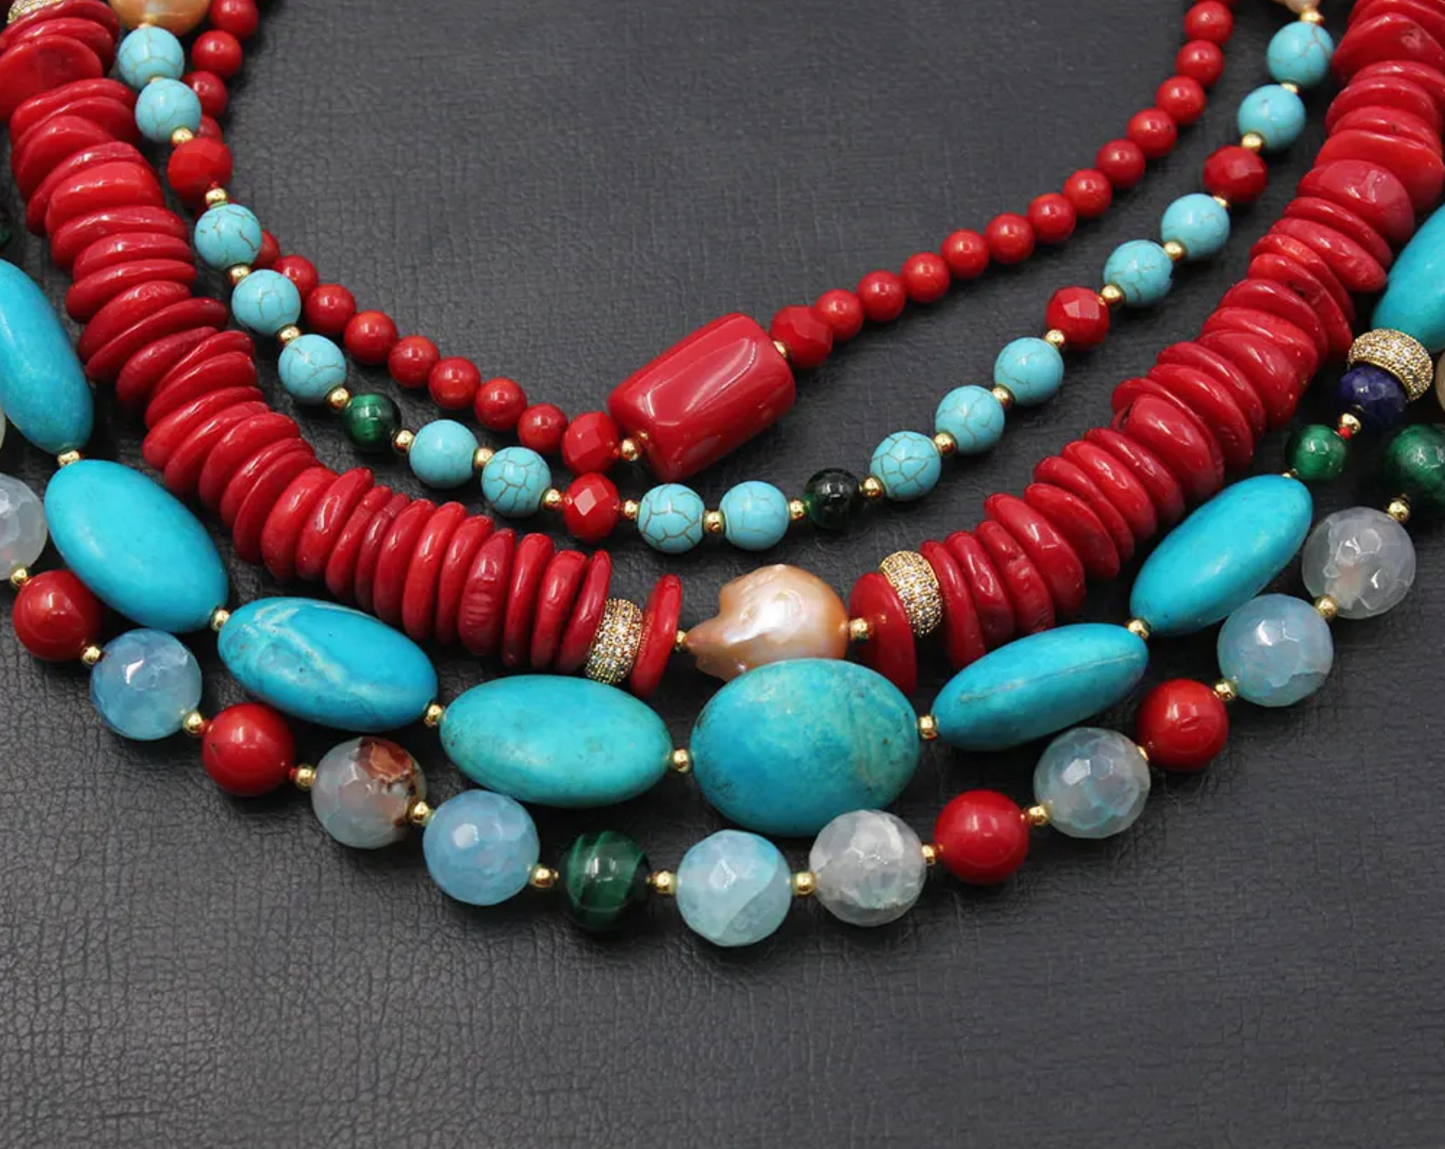 5 Row Freshwater Pearl, Howlite & Red Coral Stone Statement Beaded Handmade Necklace